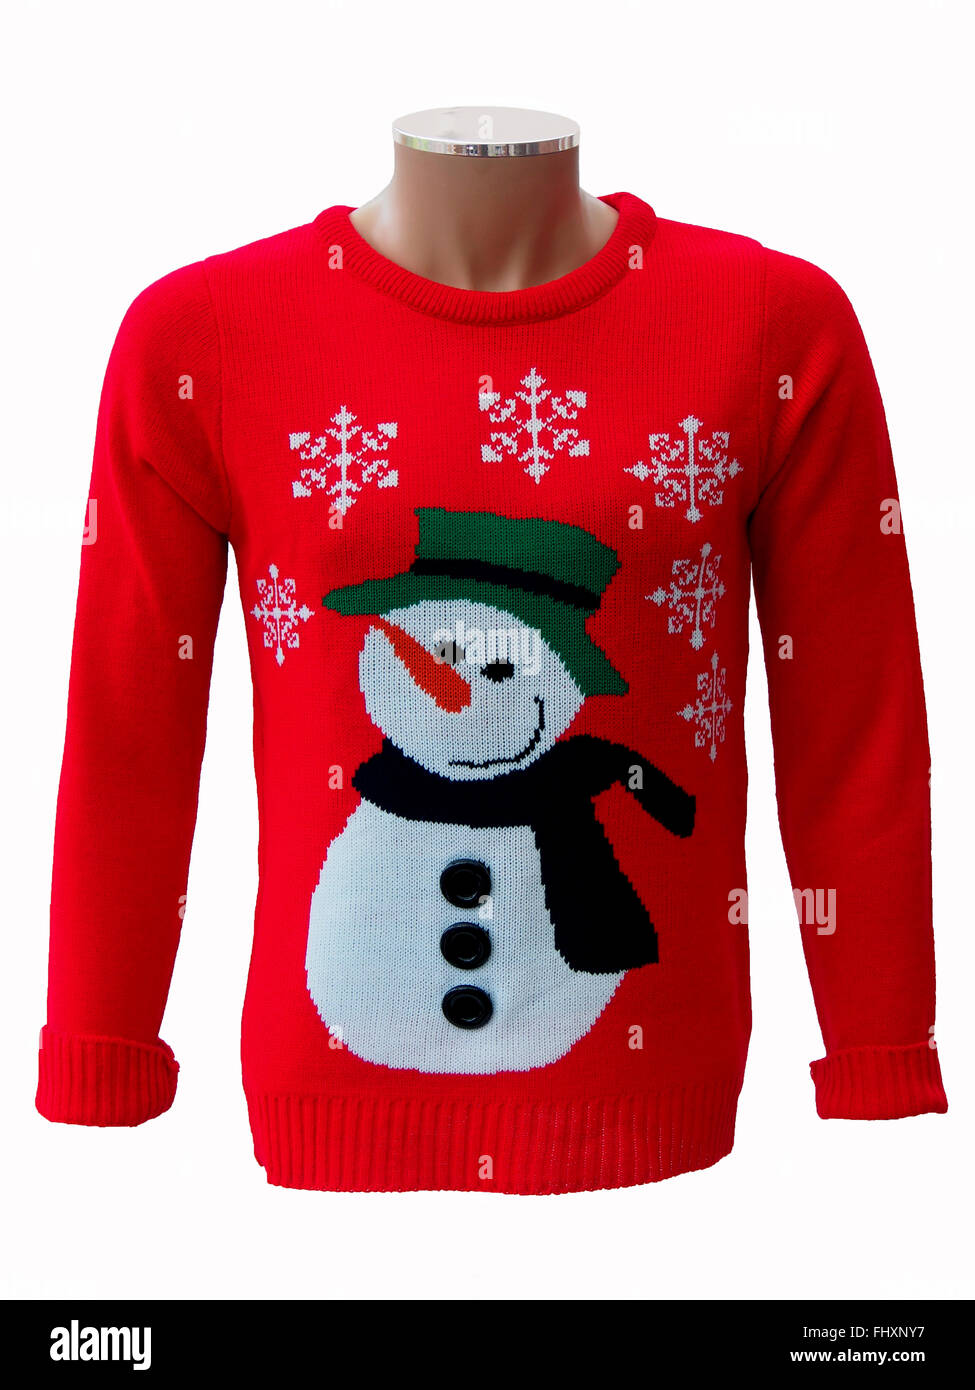 Red knitted adults' Christmas jumper on a mannequin, featuring a snowman and snowflakes, isolated on a white background. Stock Photo